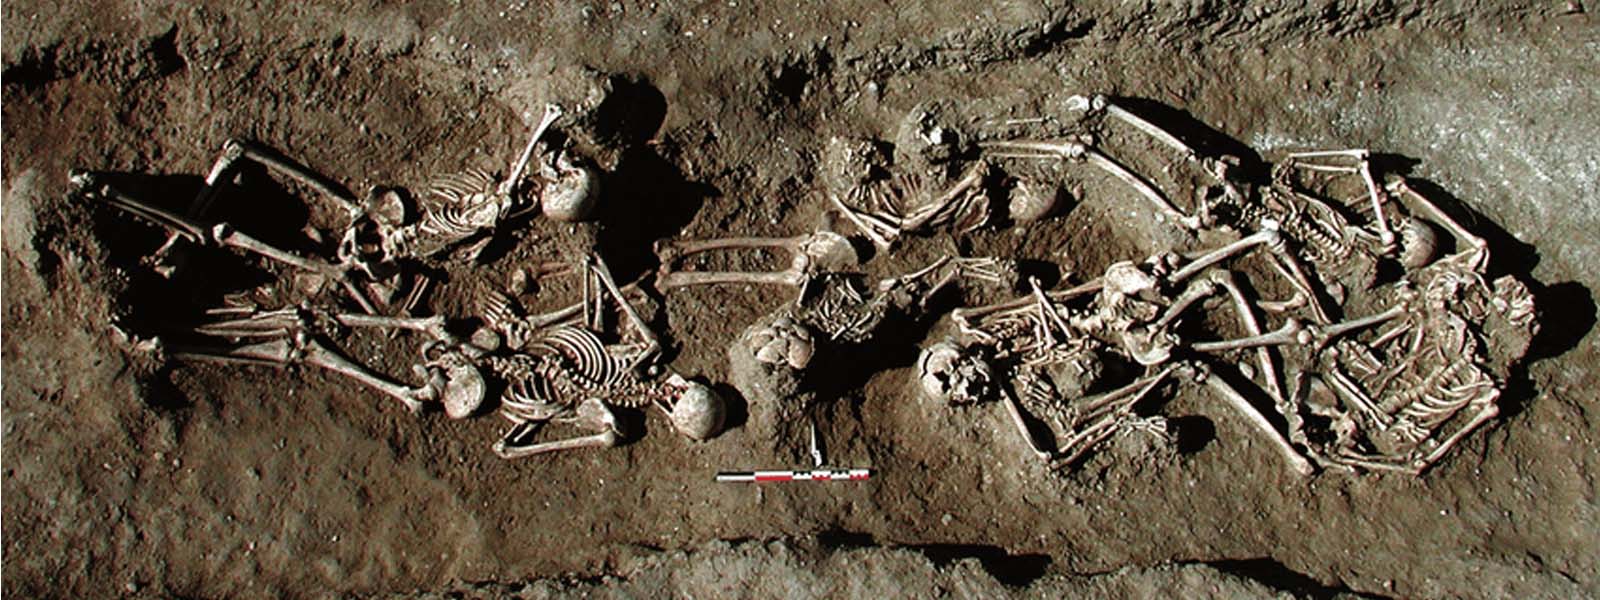 187 human skeletals uncovered from Mannar grave 